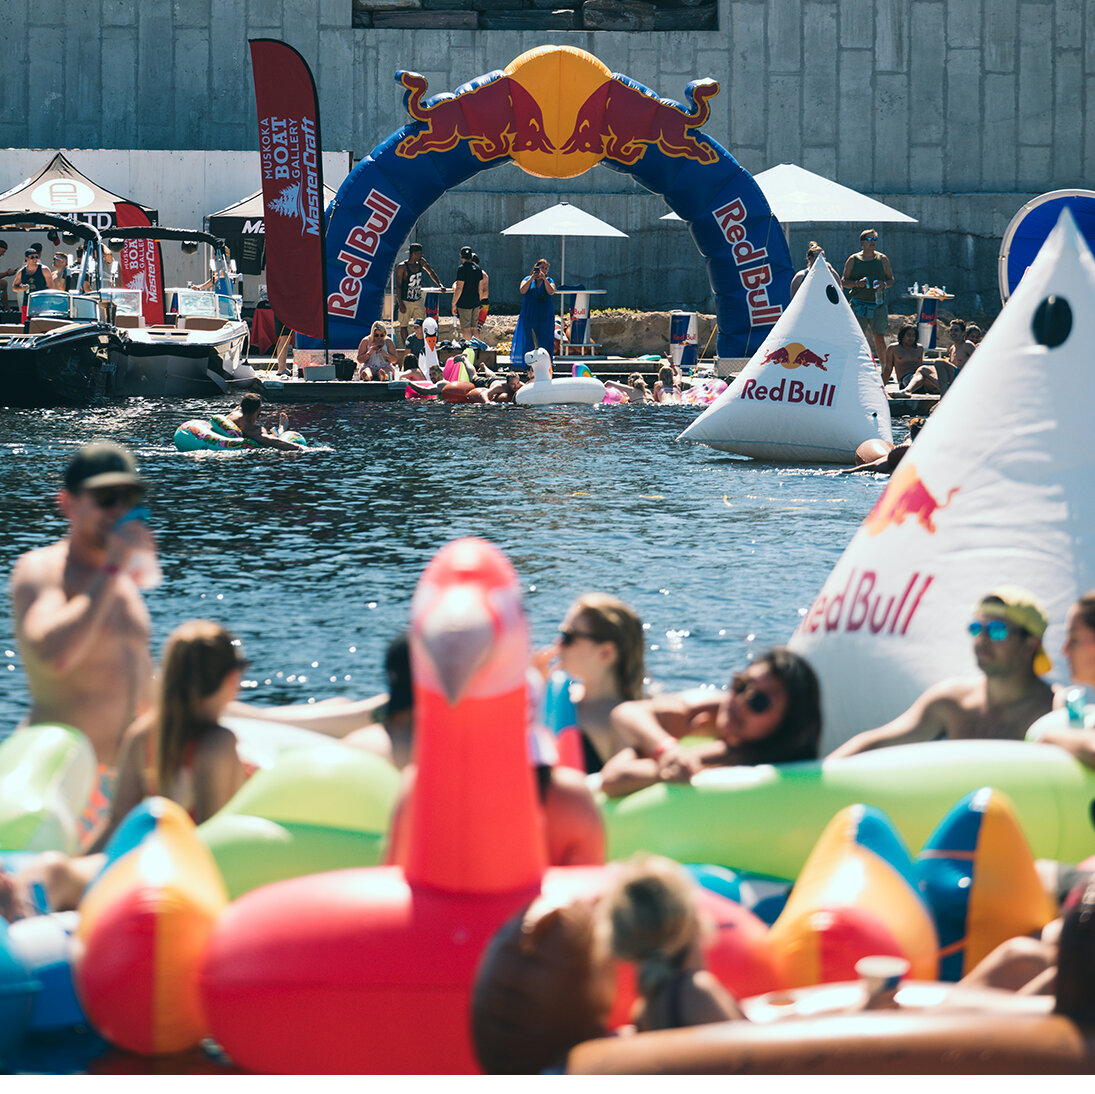 Iconic Red Bull archway located on a dock with people in floaties underneath it at brand activation. 